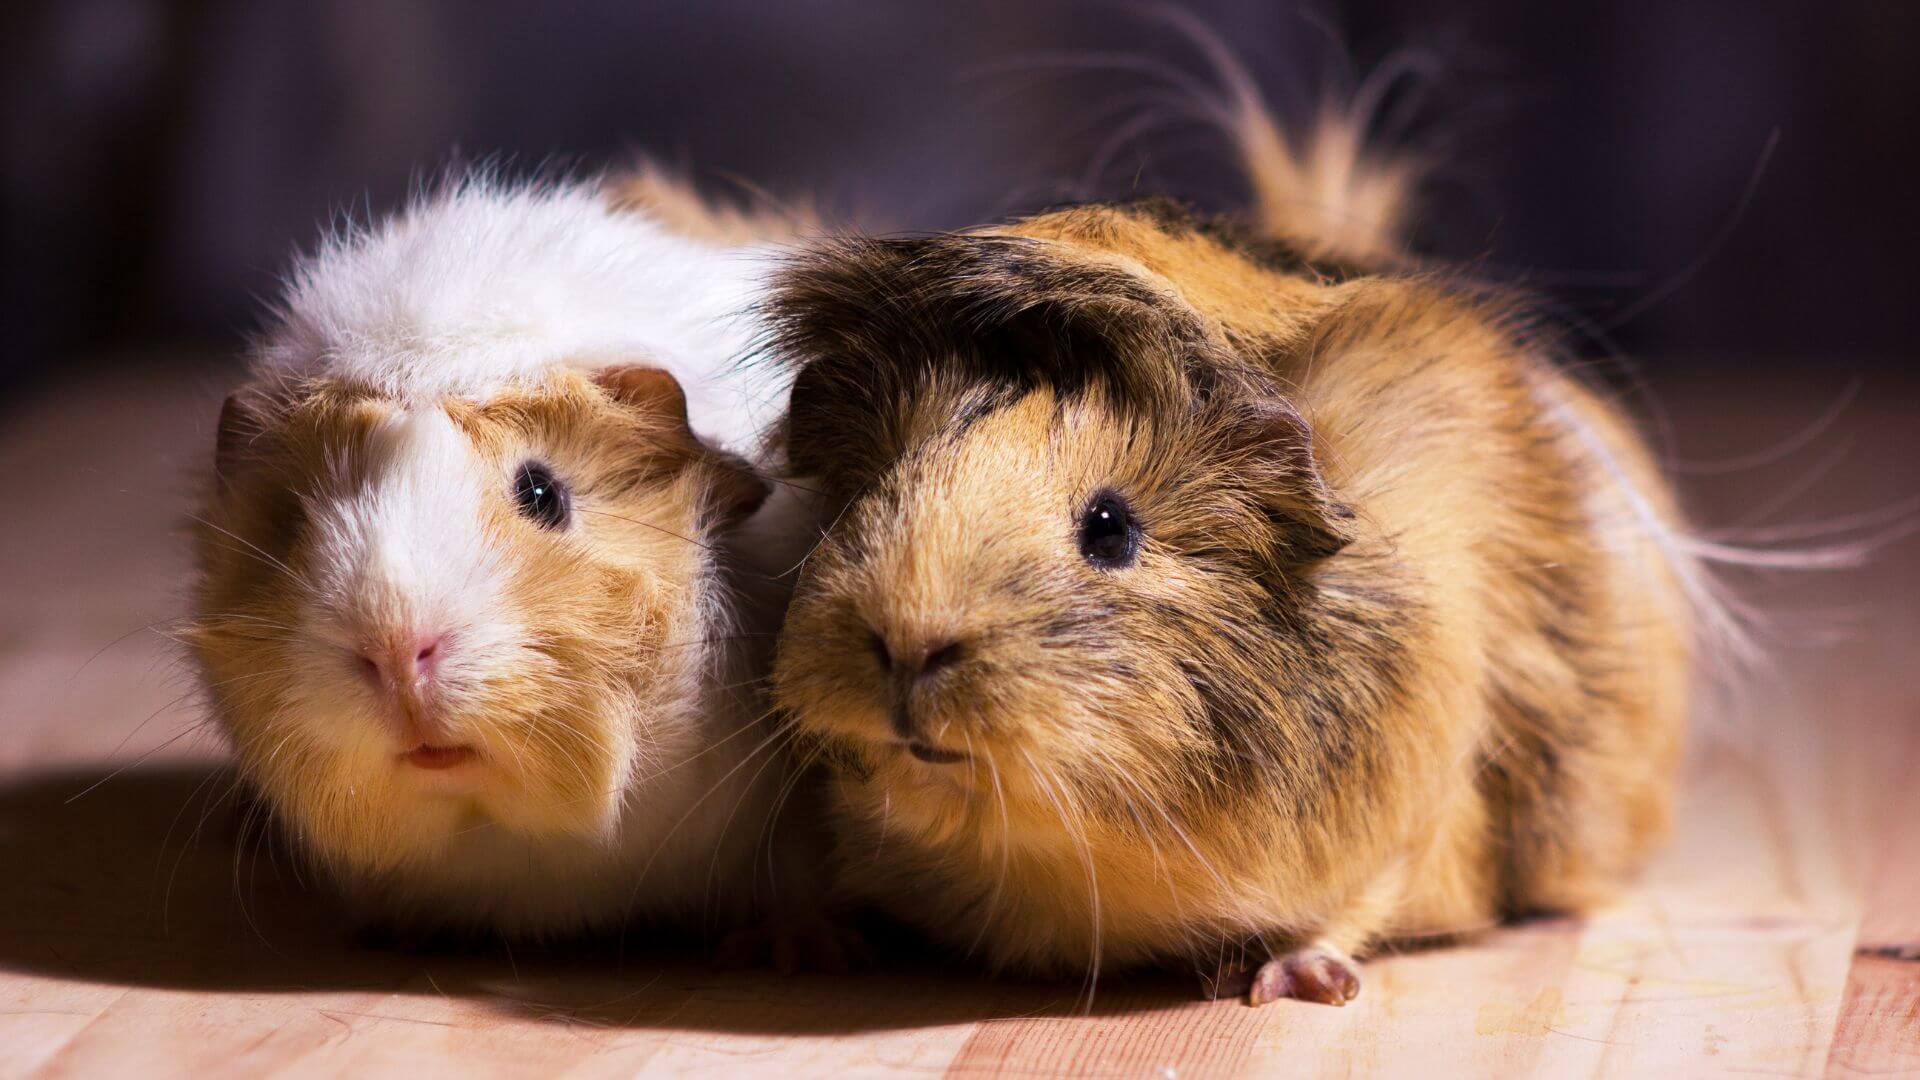 Two guinea pigs are sitting on the wooden floor